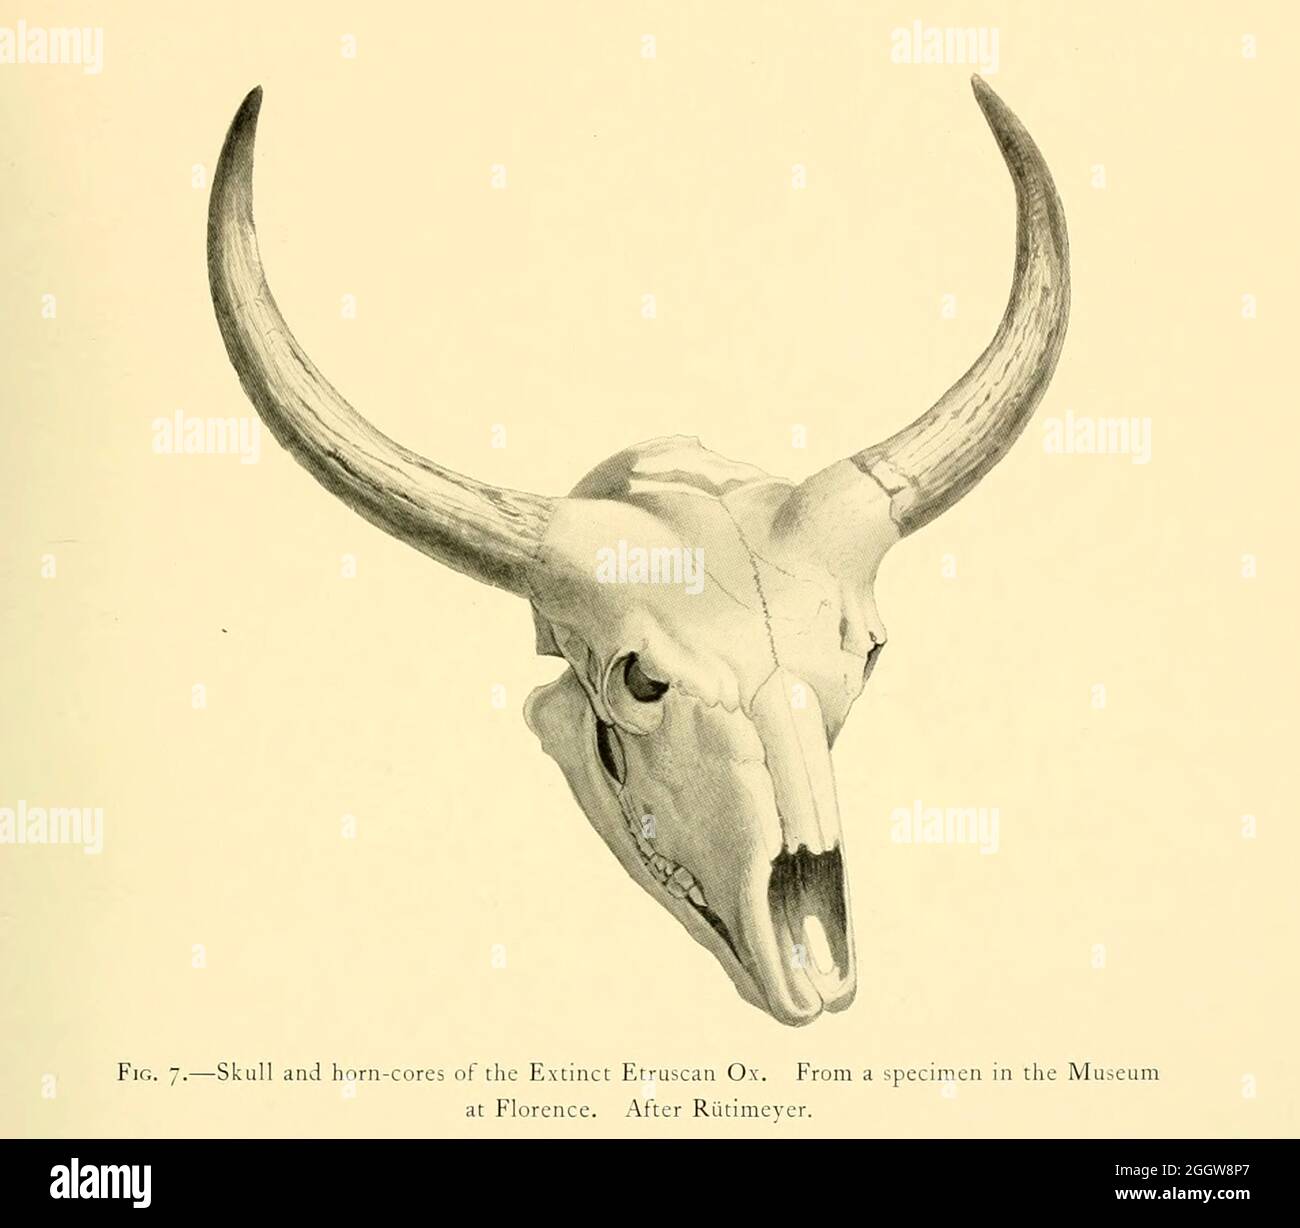 Skull and horn-cores of the Extinct Etruscan ox (Bos elatus). From a specimen in the Museum at Florence. After Rtitimeyer illustration From the book ' Wild oxen, sheep & goats of all lands, living and extinct ' by Richard Lydekker (1849-1915) Published in 1898 by Rowland Ward, London Stock Photo